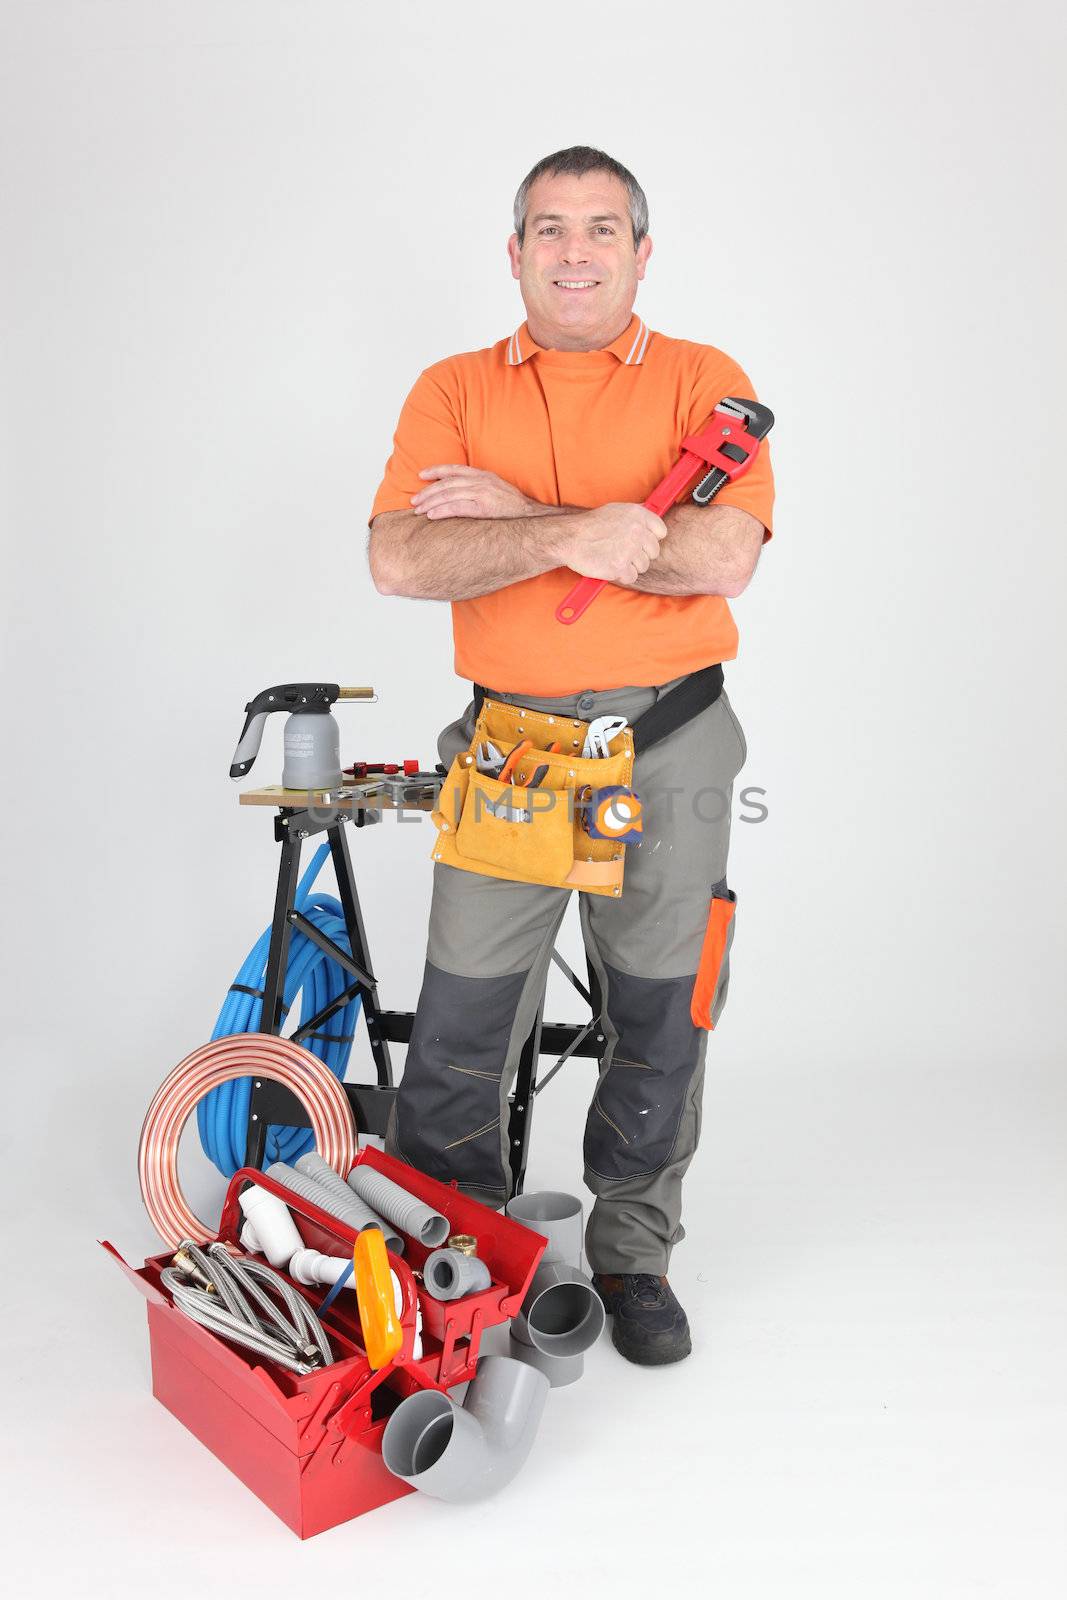 Studio shot of a plumber with tools of the trade by phovoir